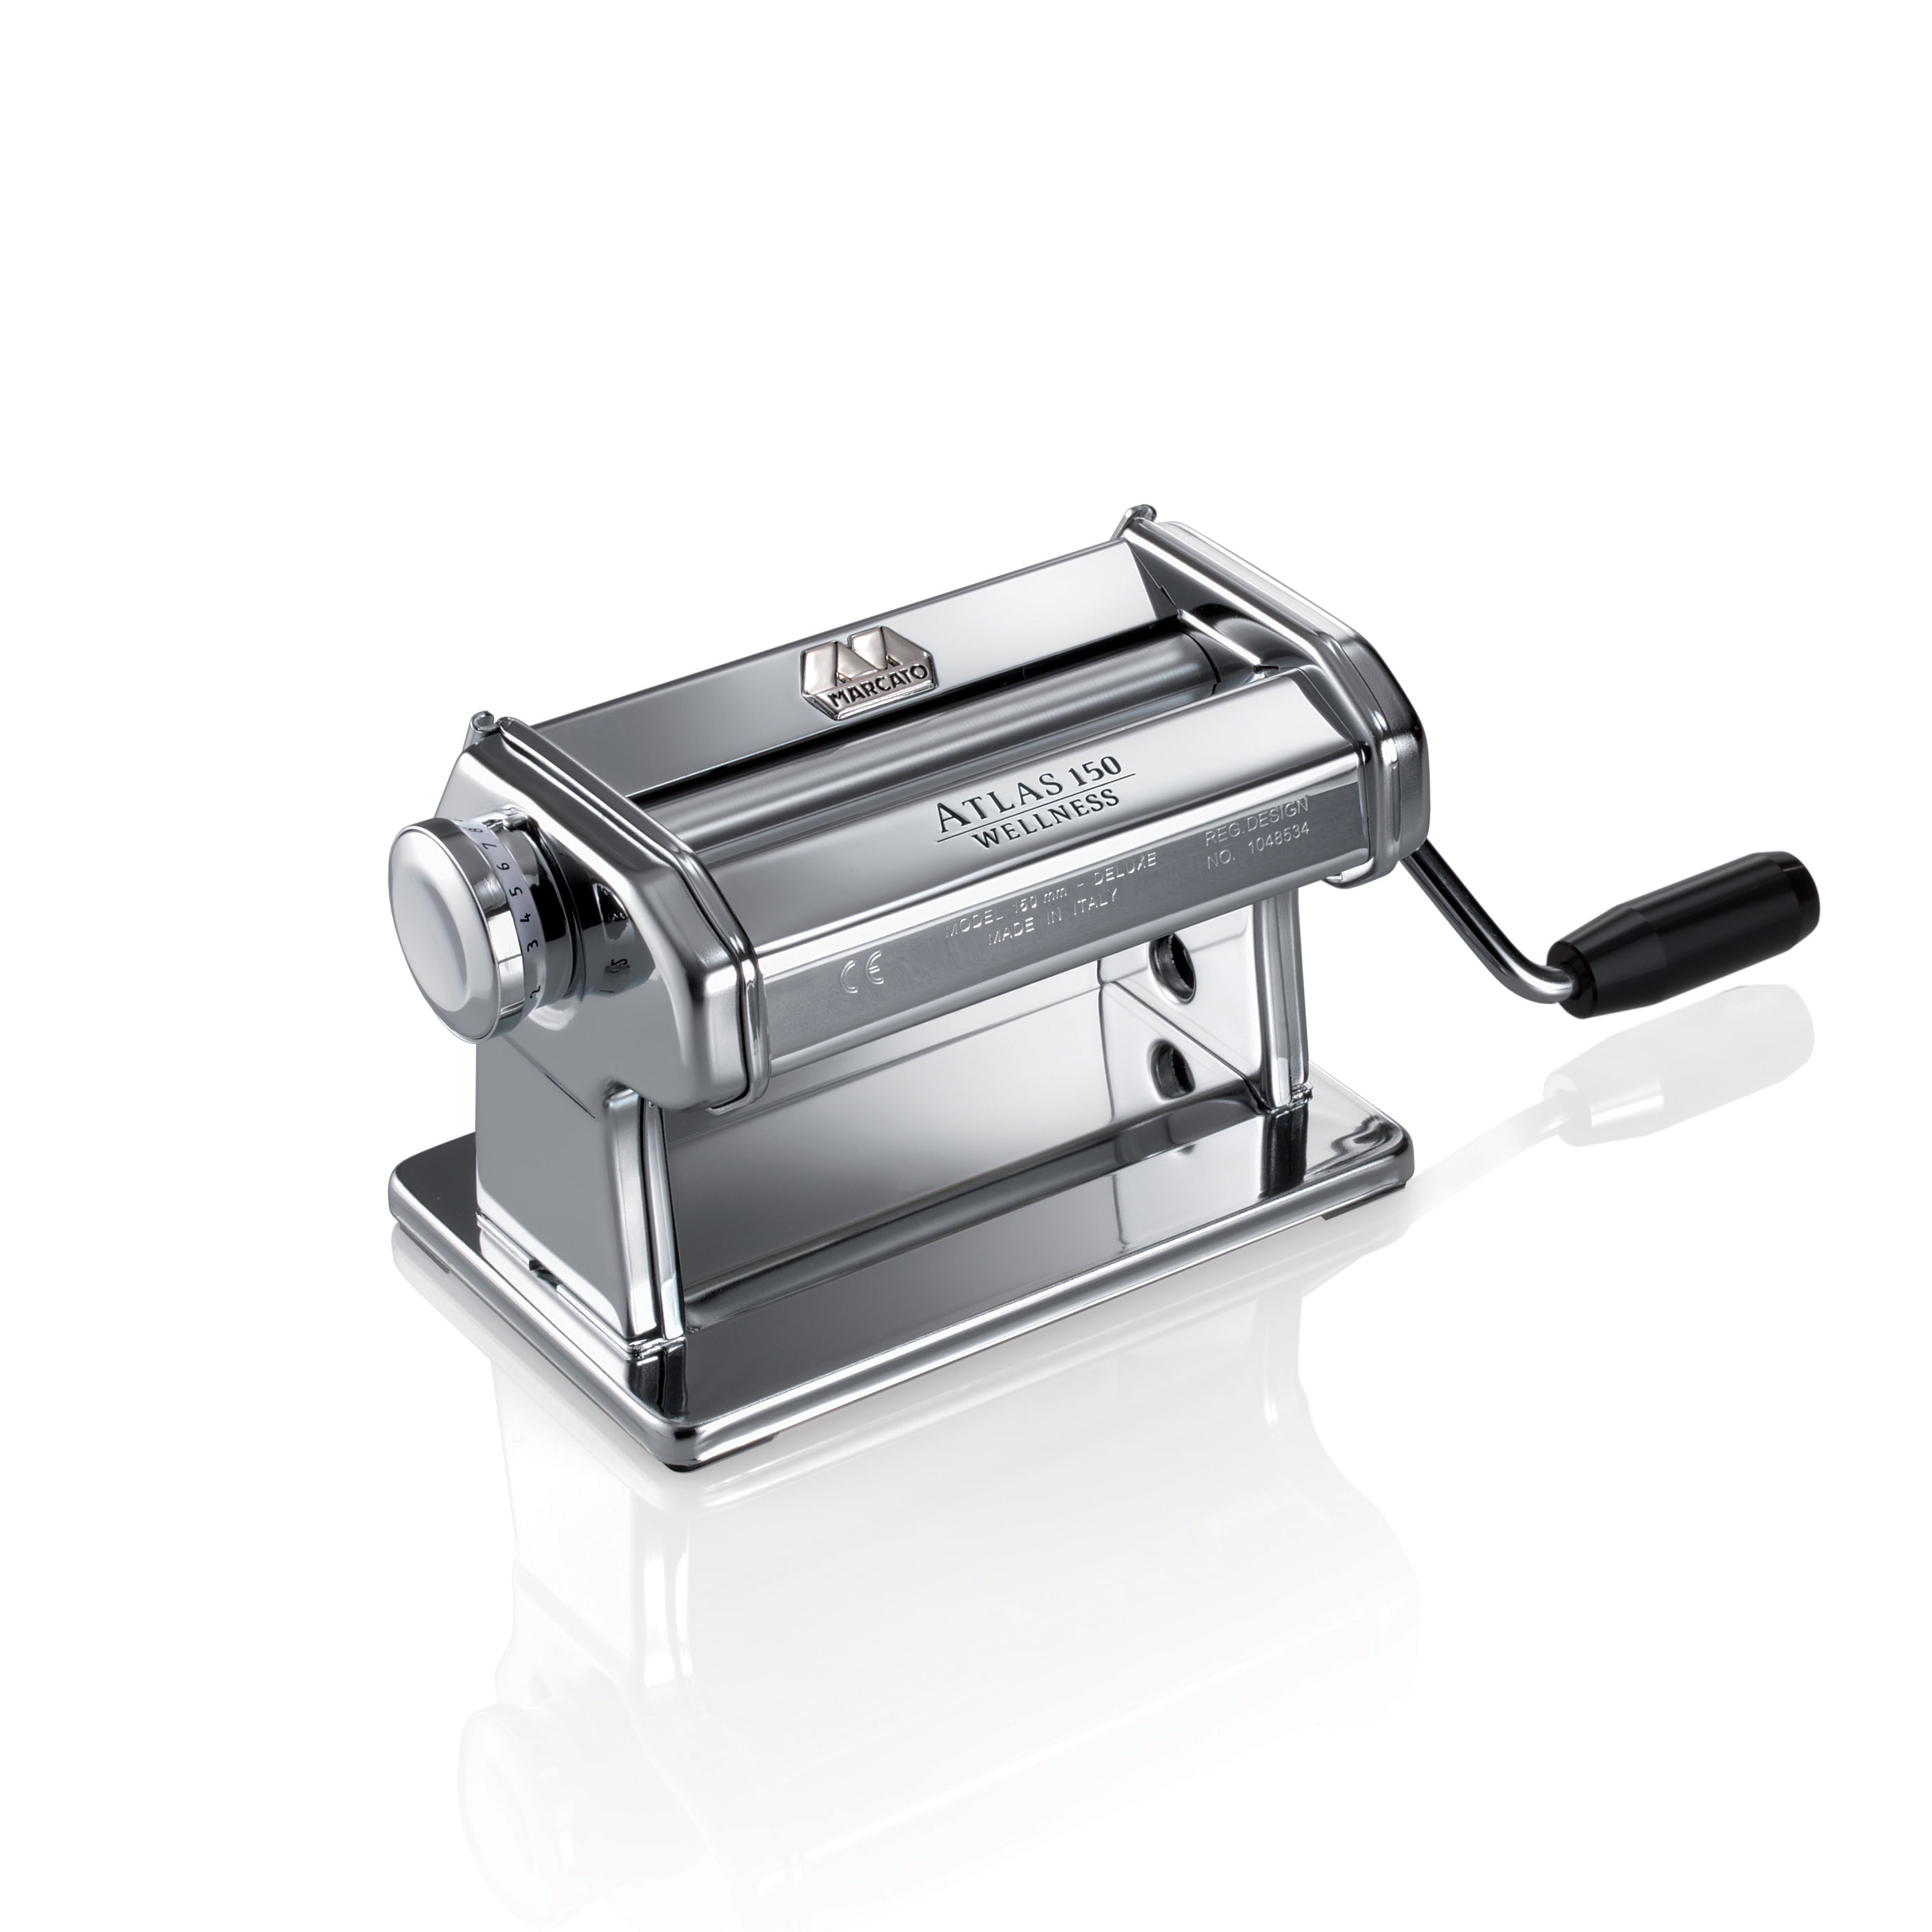 Marcato Atlas Dough Roller, Silver, Includes 150-Millimeter Roller with Hand Crank and Instructions -